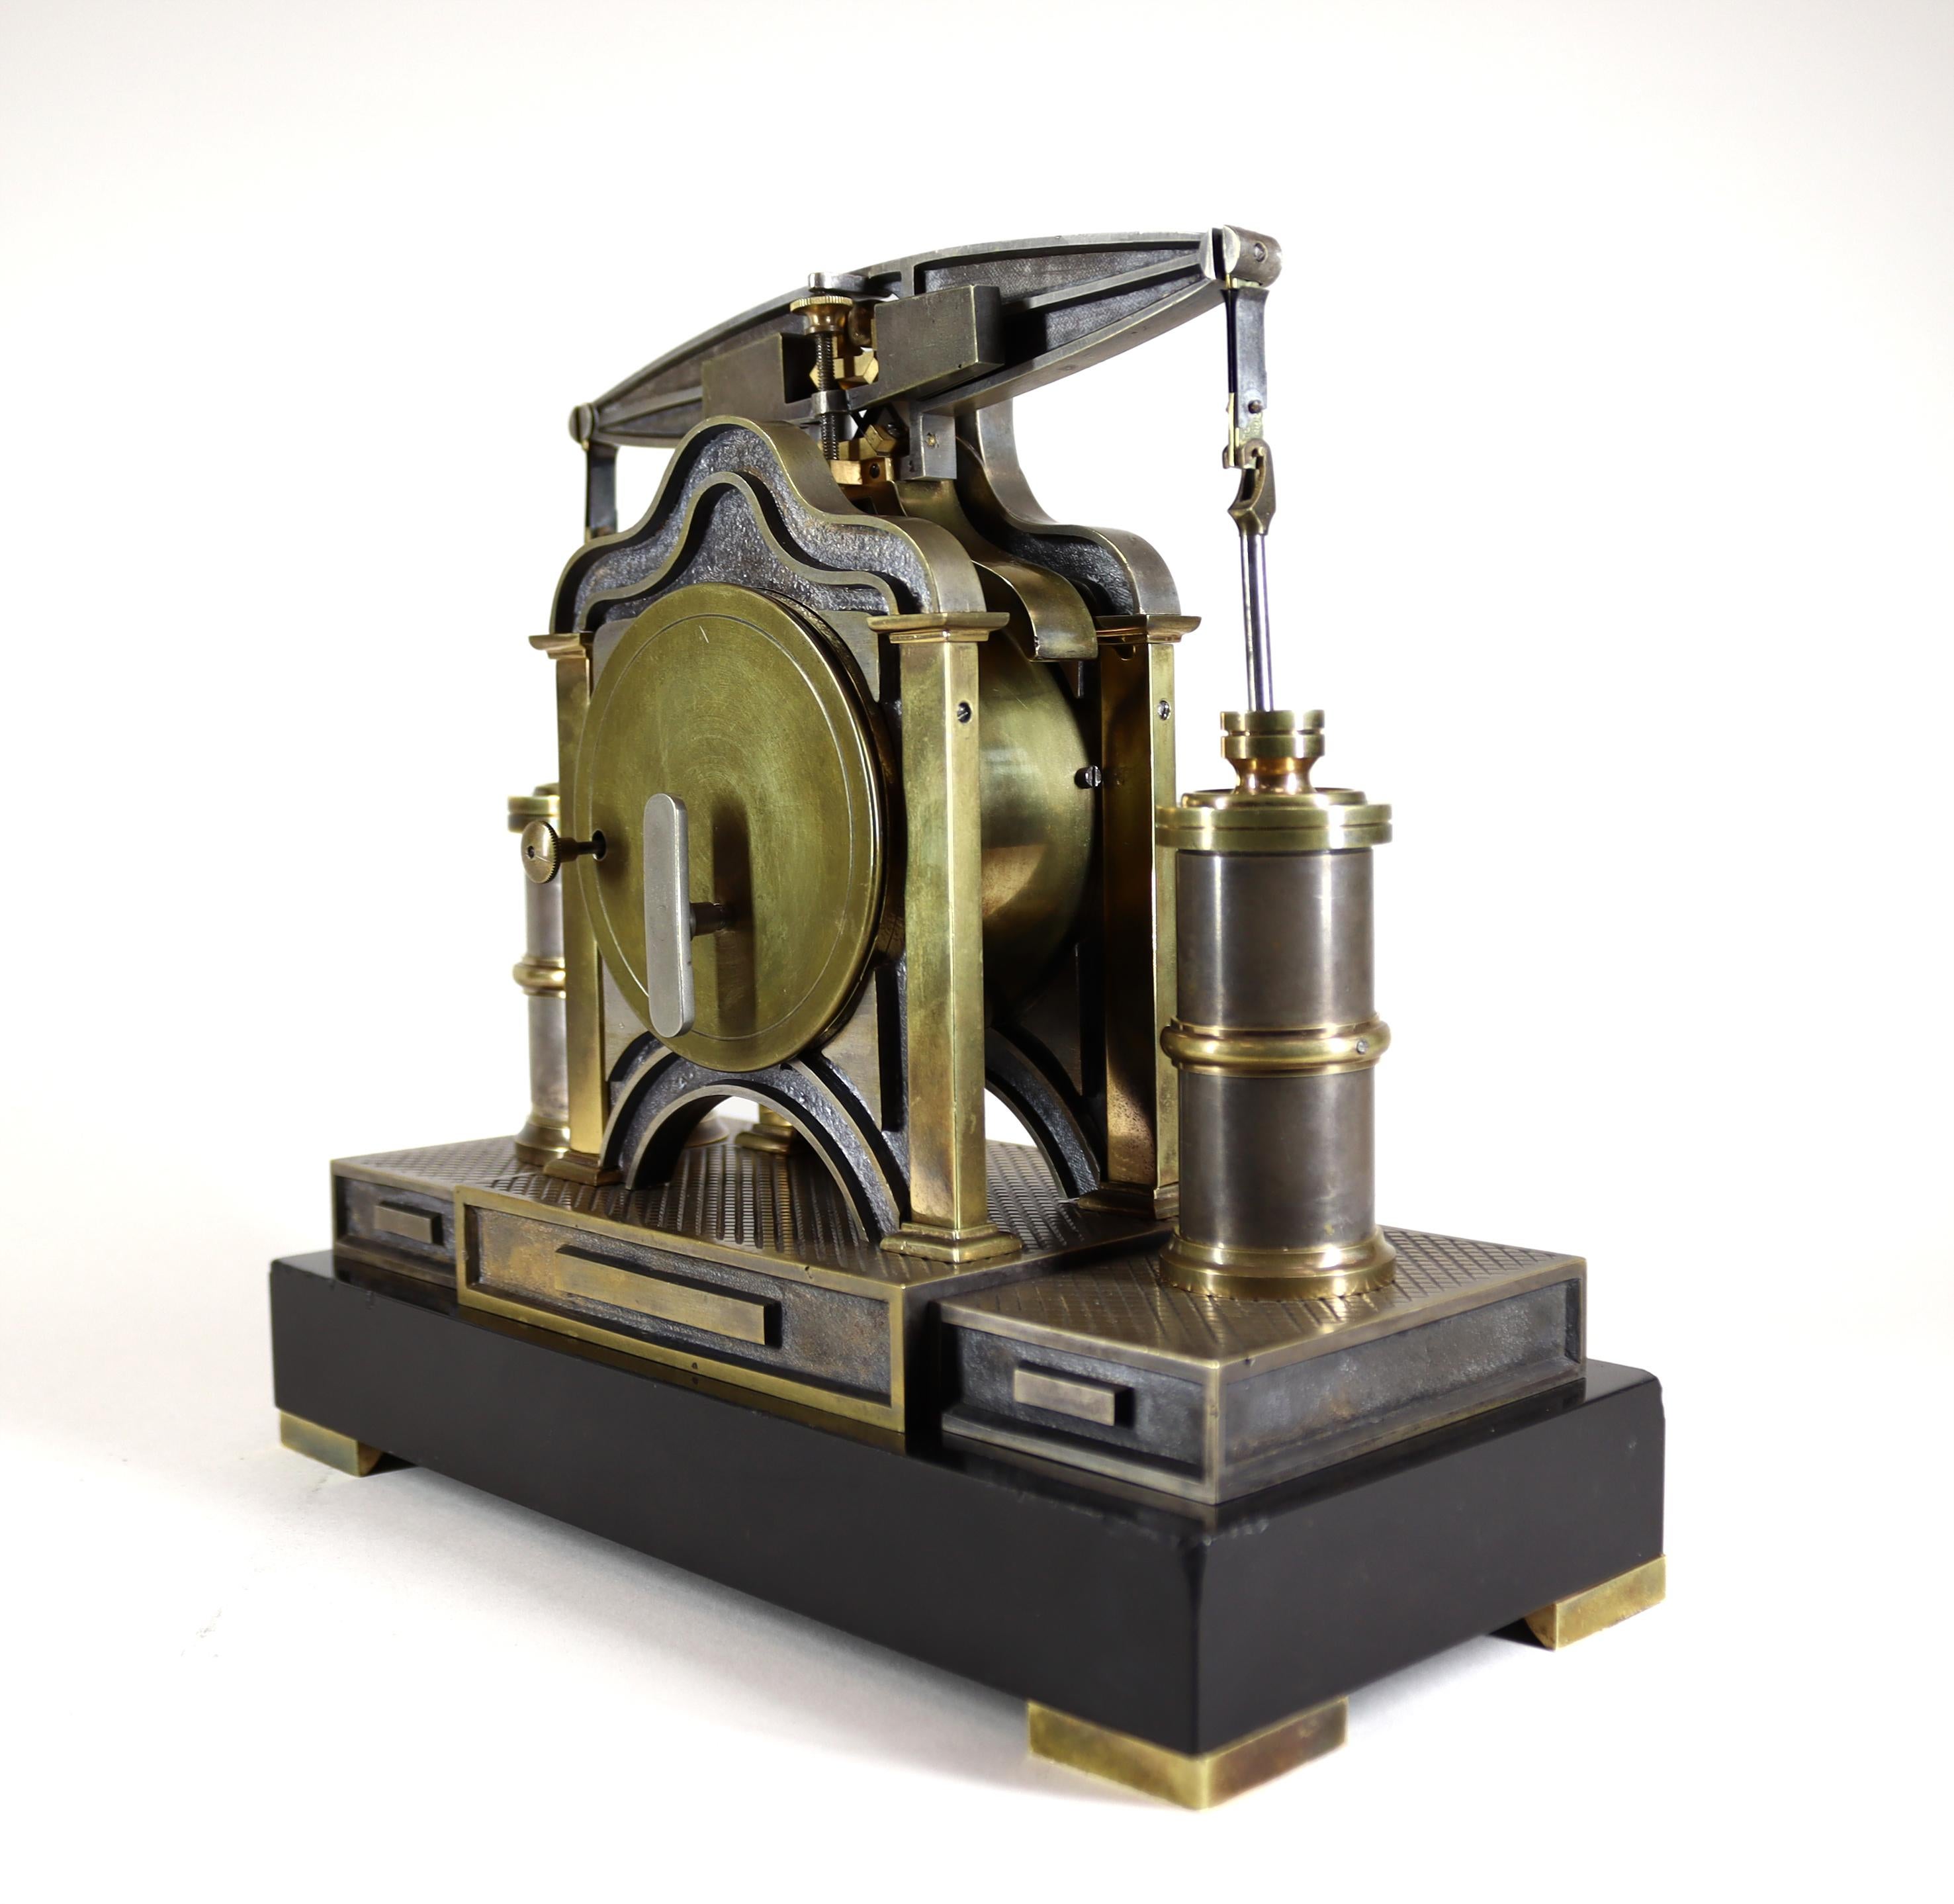 A novelty mantel clock in the form of an industrial beam engine by Andre Romain Guilmet, dating from circa 1878 and numbered 196 and signed by Giulmet.

The eight day movement is surmounted by a beam that forms the upper part of of a compound